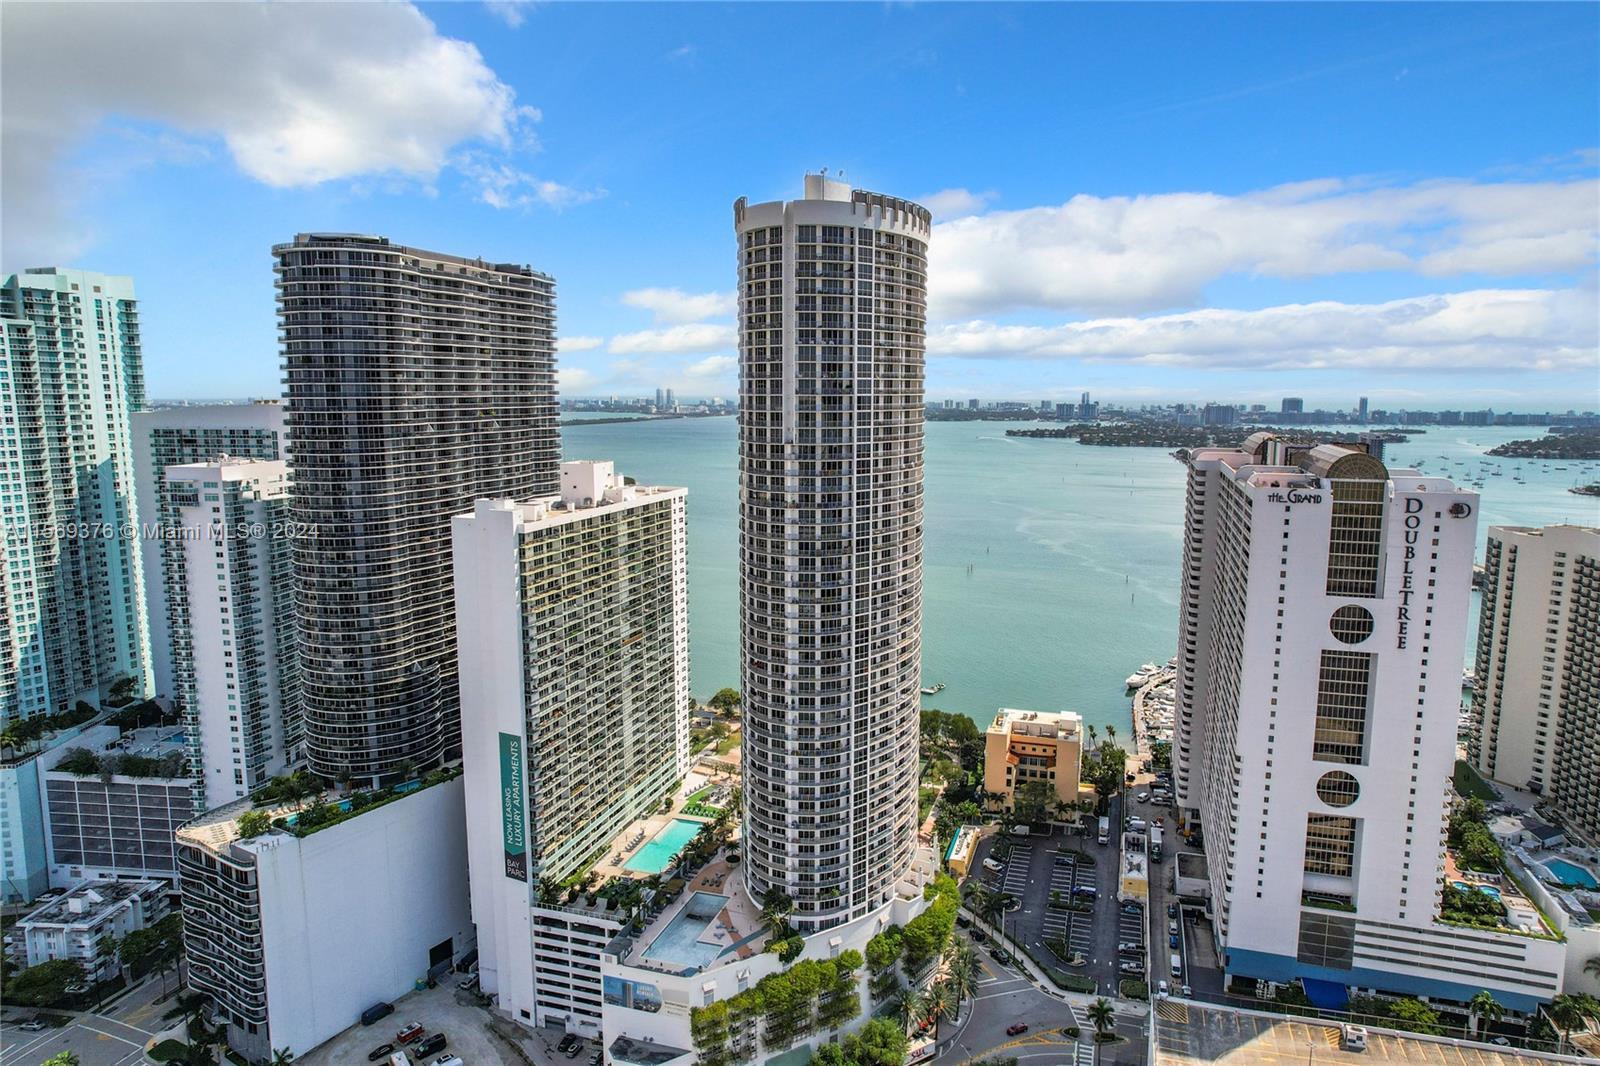 Luxurious studio unit in Miami's Media & Entertainment District, within Opera Tower. Offers stunning